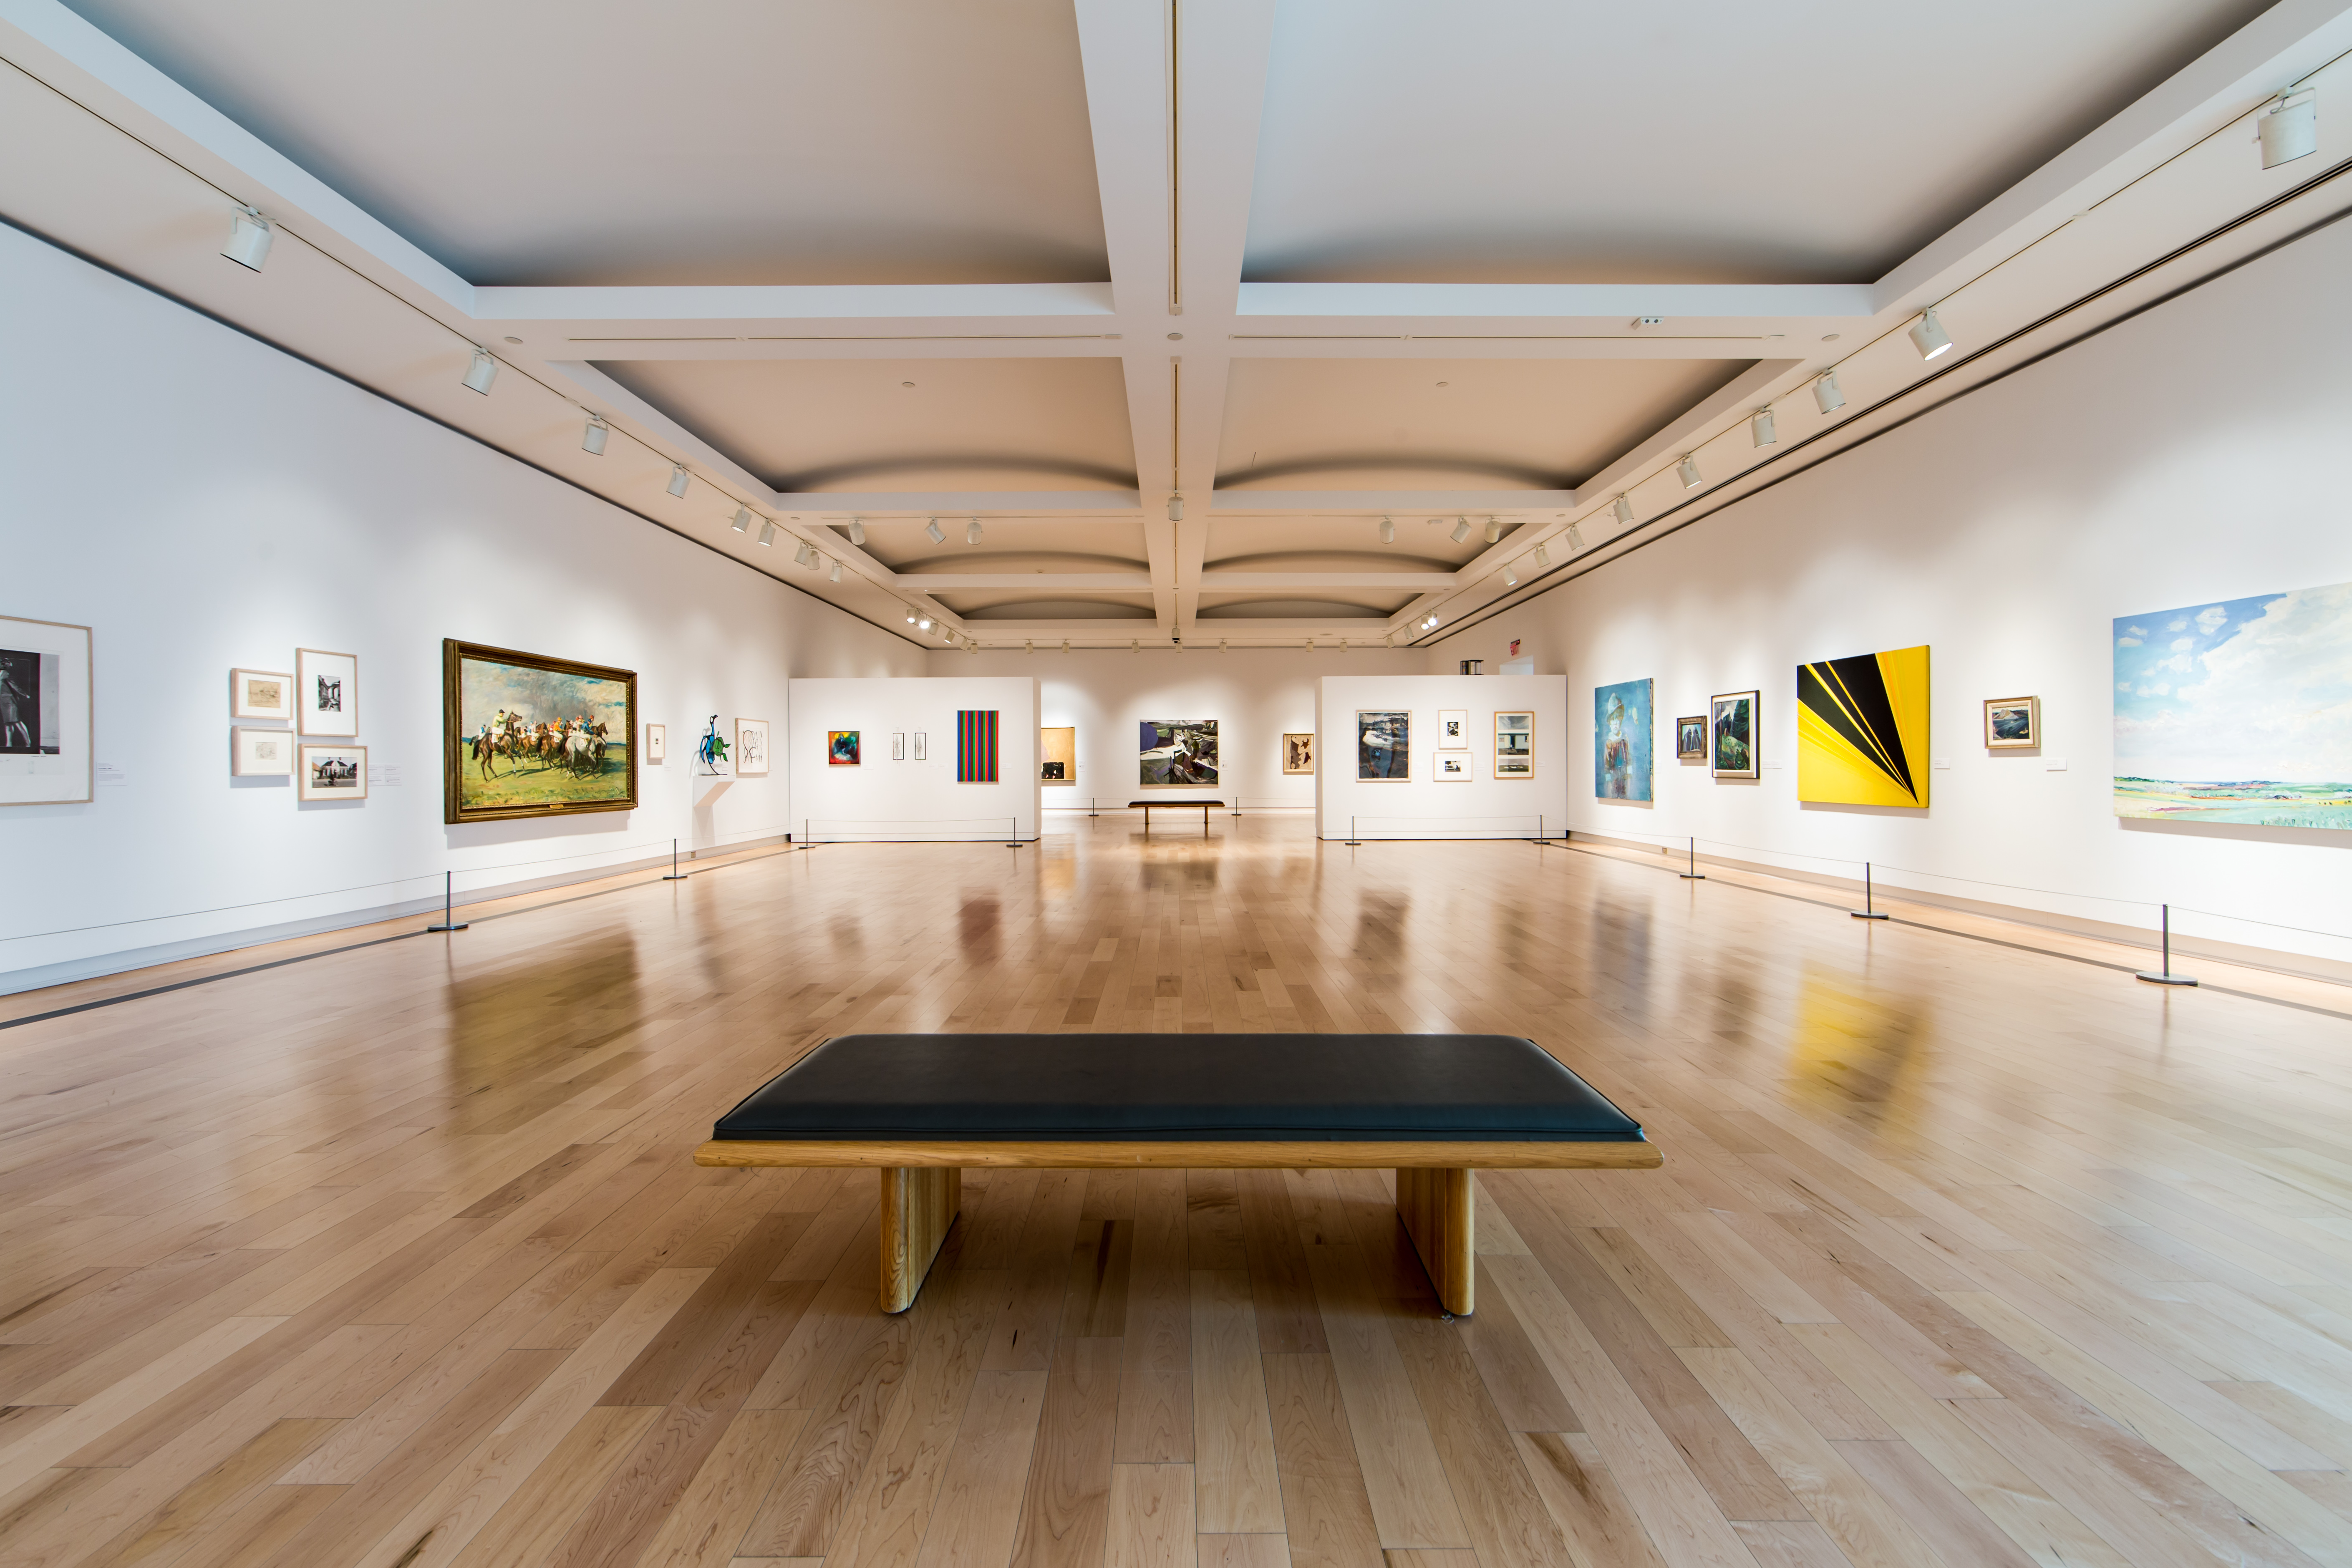 Photo of the interior of an art gallery